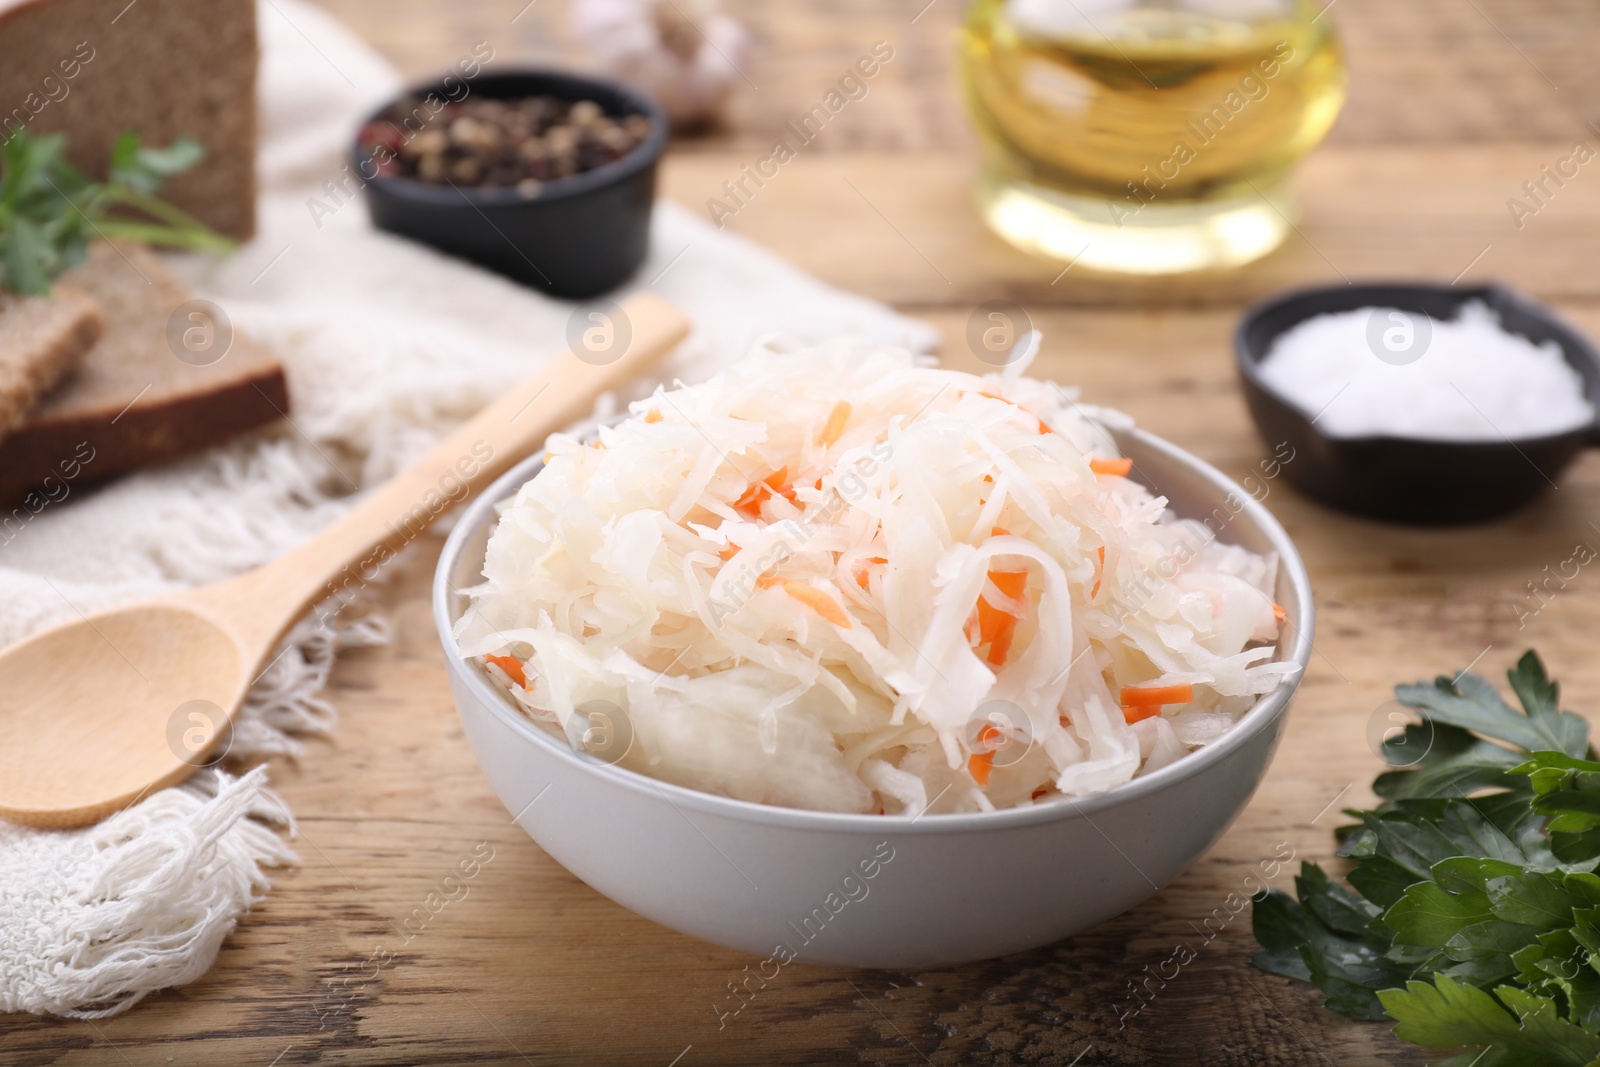 Photo of Bowl of tasty sauerkraut and ingredients on wooden table